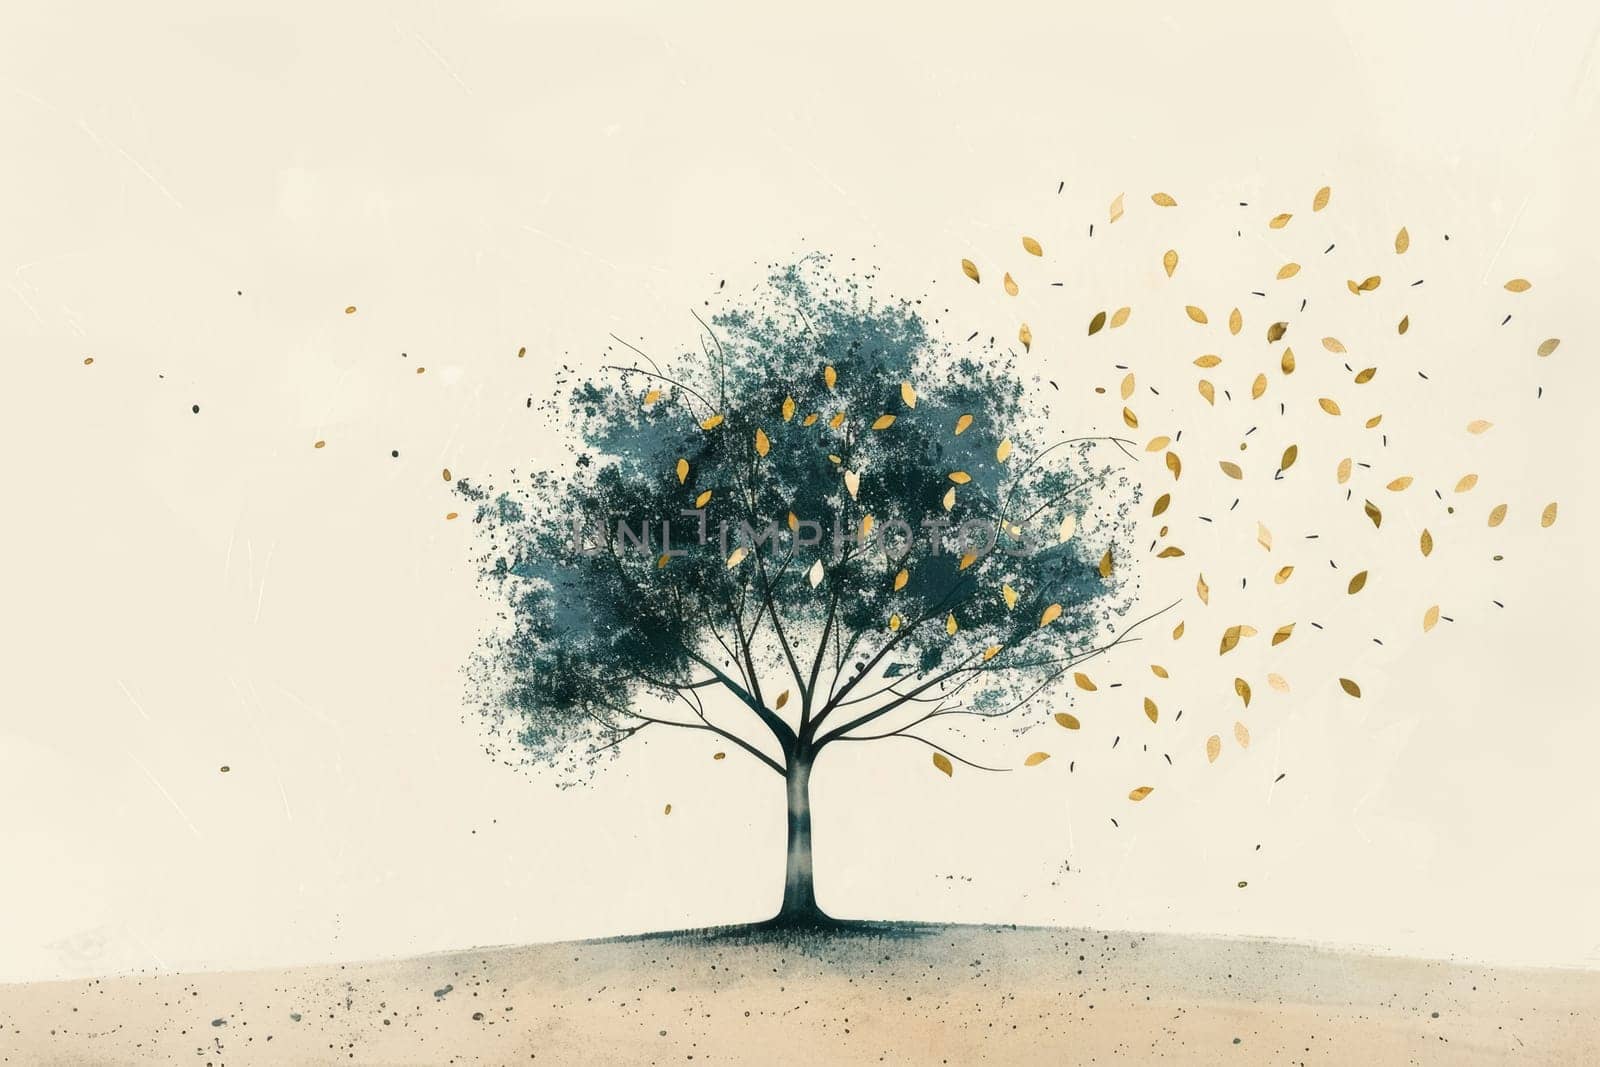 Stark illustration featuring a solitary tree with leaves dispersing in the wind, set against rolling hills.